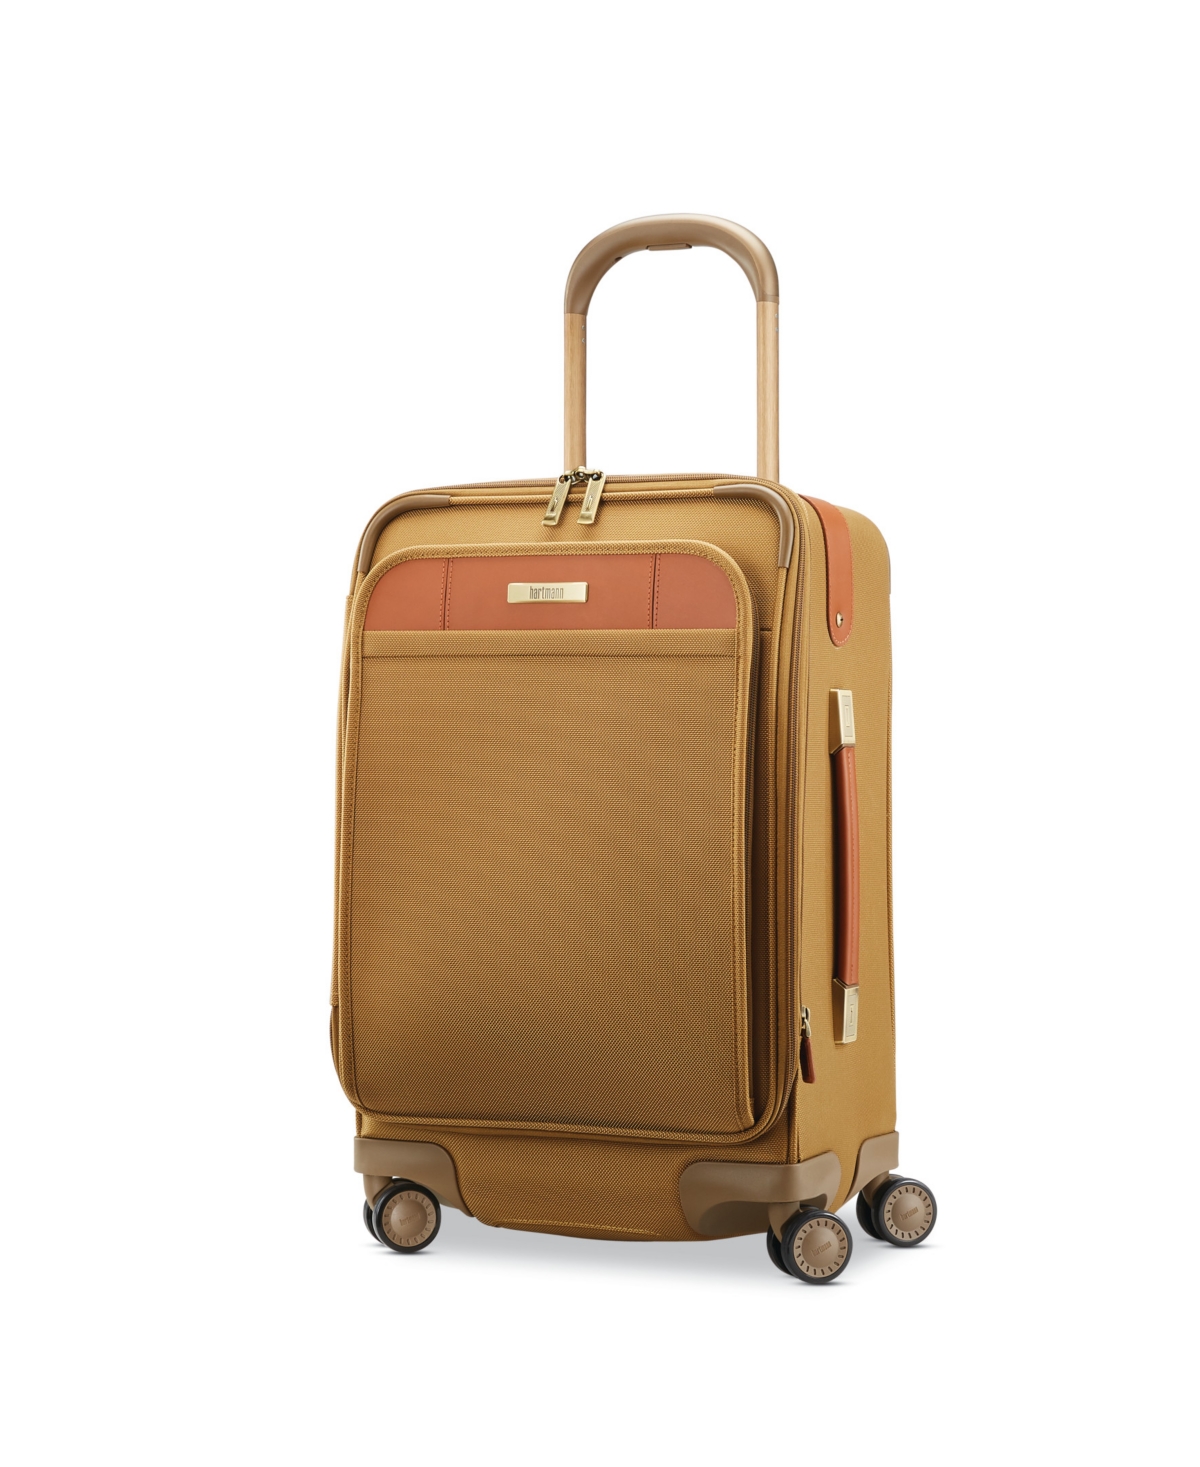 Ratio Classic Deluxe 2 Global 20" Softside Carry-On Spinner - Safari